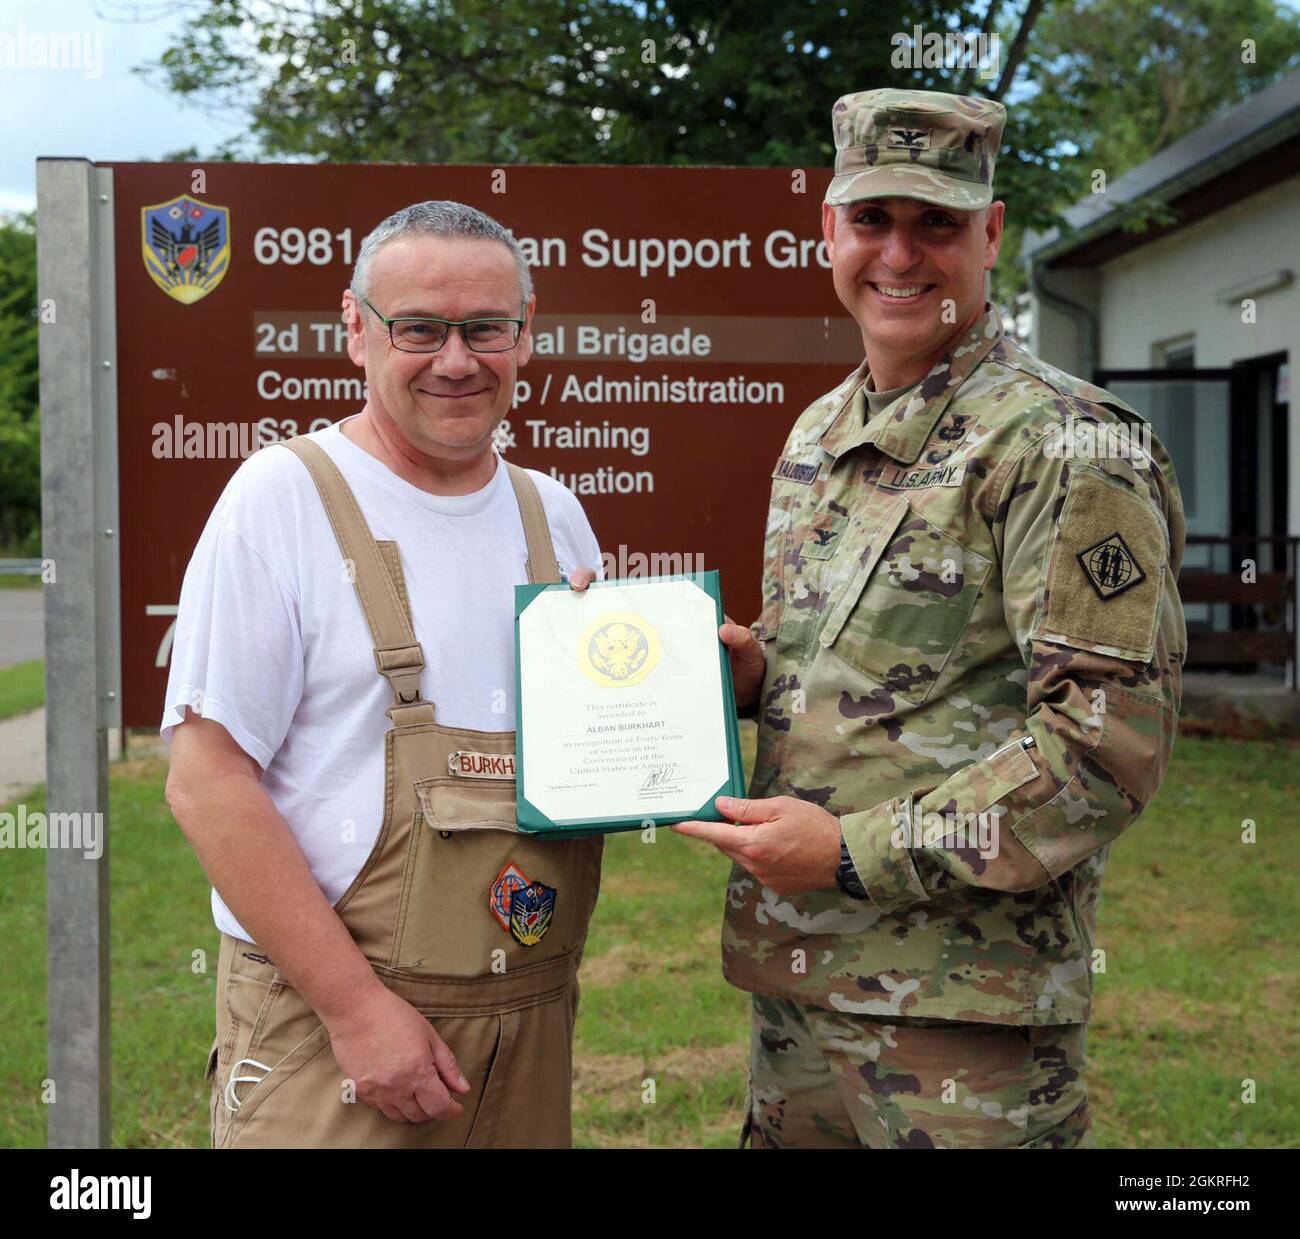 GERMERSHEIM, Germany -- Col. Michael Kaloostian, Commander, 2d Theater Signal Brigade, presents a Certificate of Appreciation to Mr. Alban Burkhart, 6981st Civilian Support Group, June 21, 2021 in recognition of Mr. Burkhart’s 40 years of service in the Government of the United States of America. Stock Photo